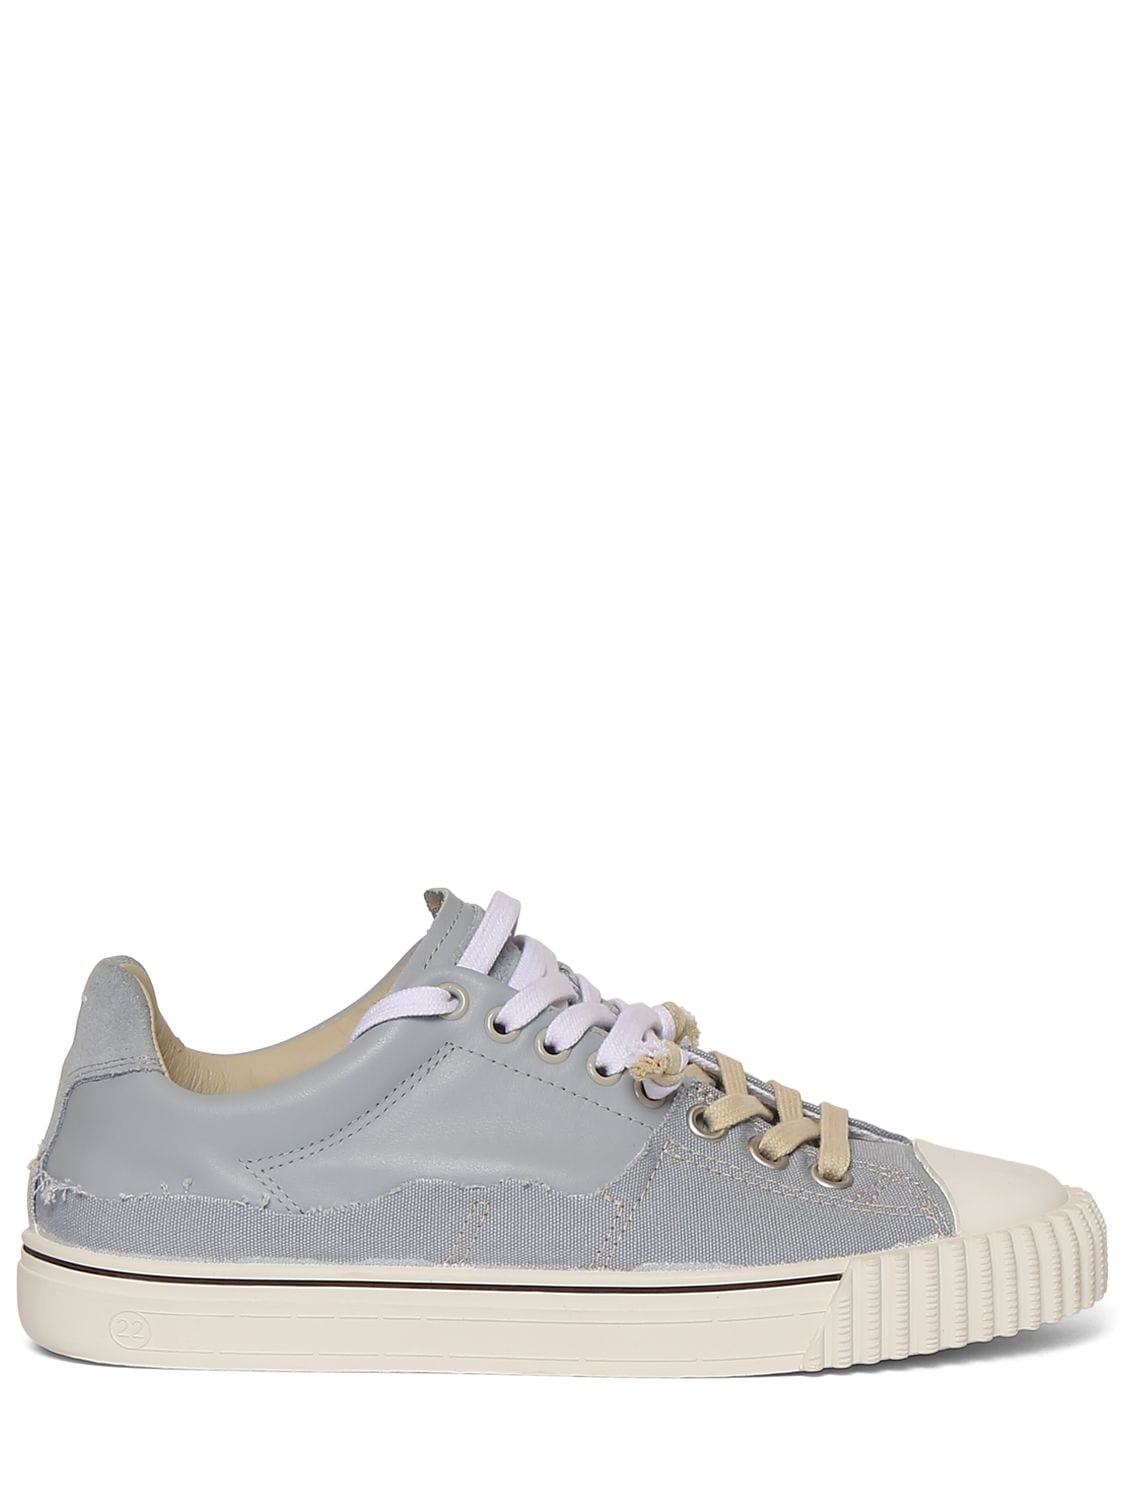 Maison Margiela Evolution Distressed Canvas And Leather Trainers In Light Blue